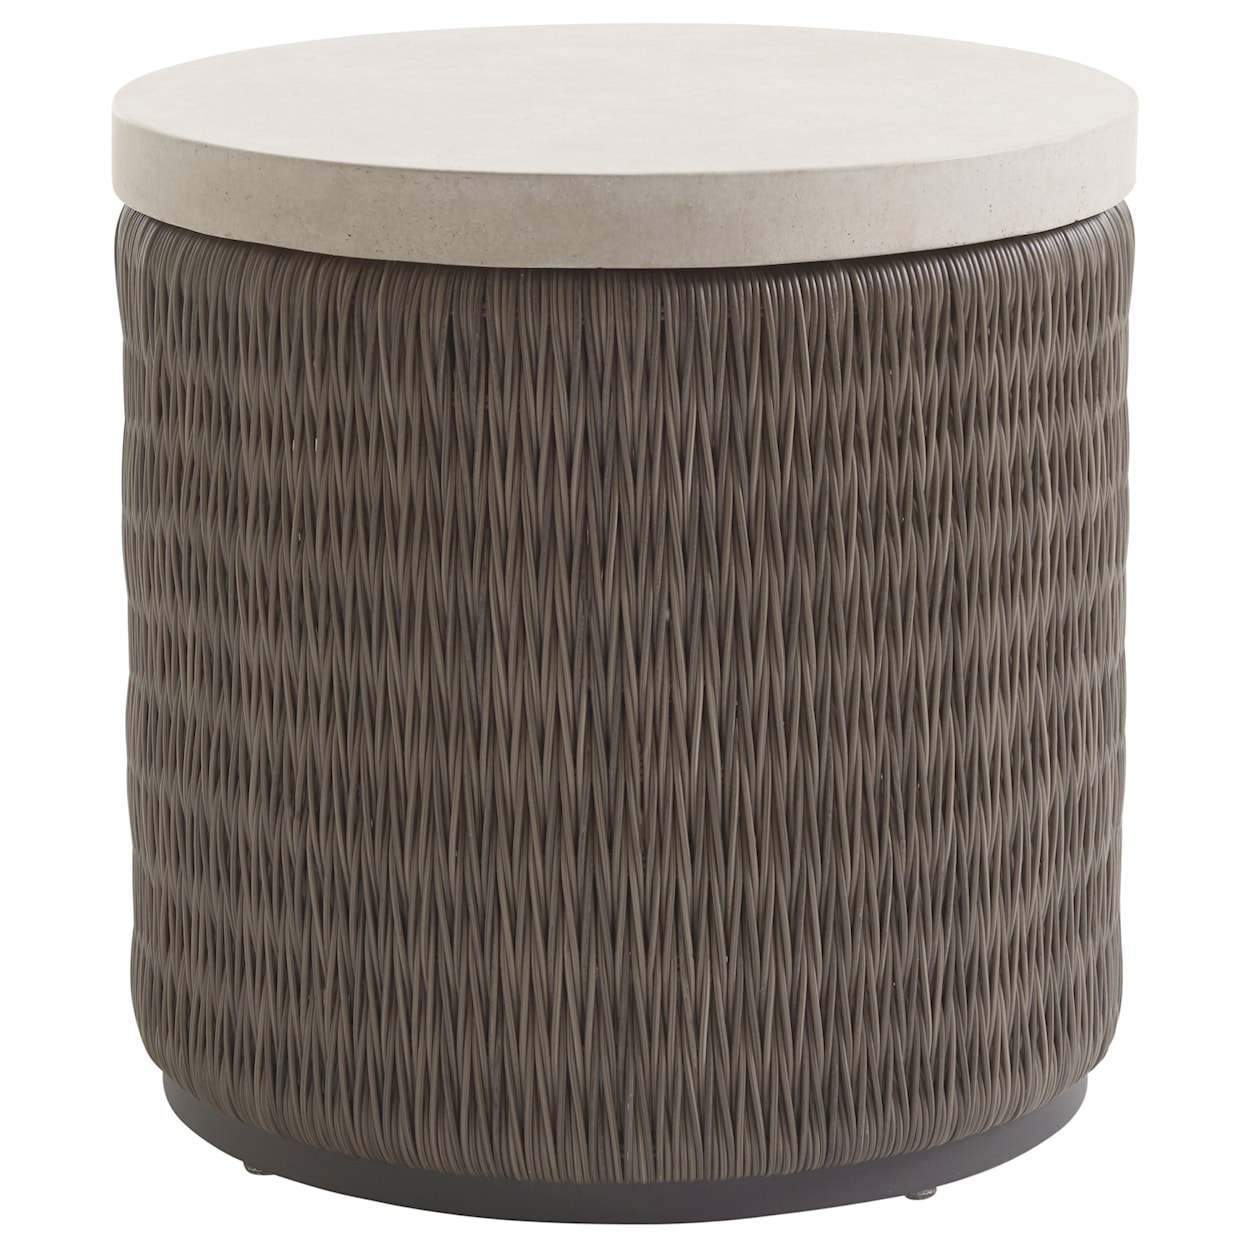 Tommy Bahama Outdoor Living Cypress Point Ocean Terrace Round End Table with Weatherstone Top